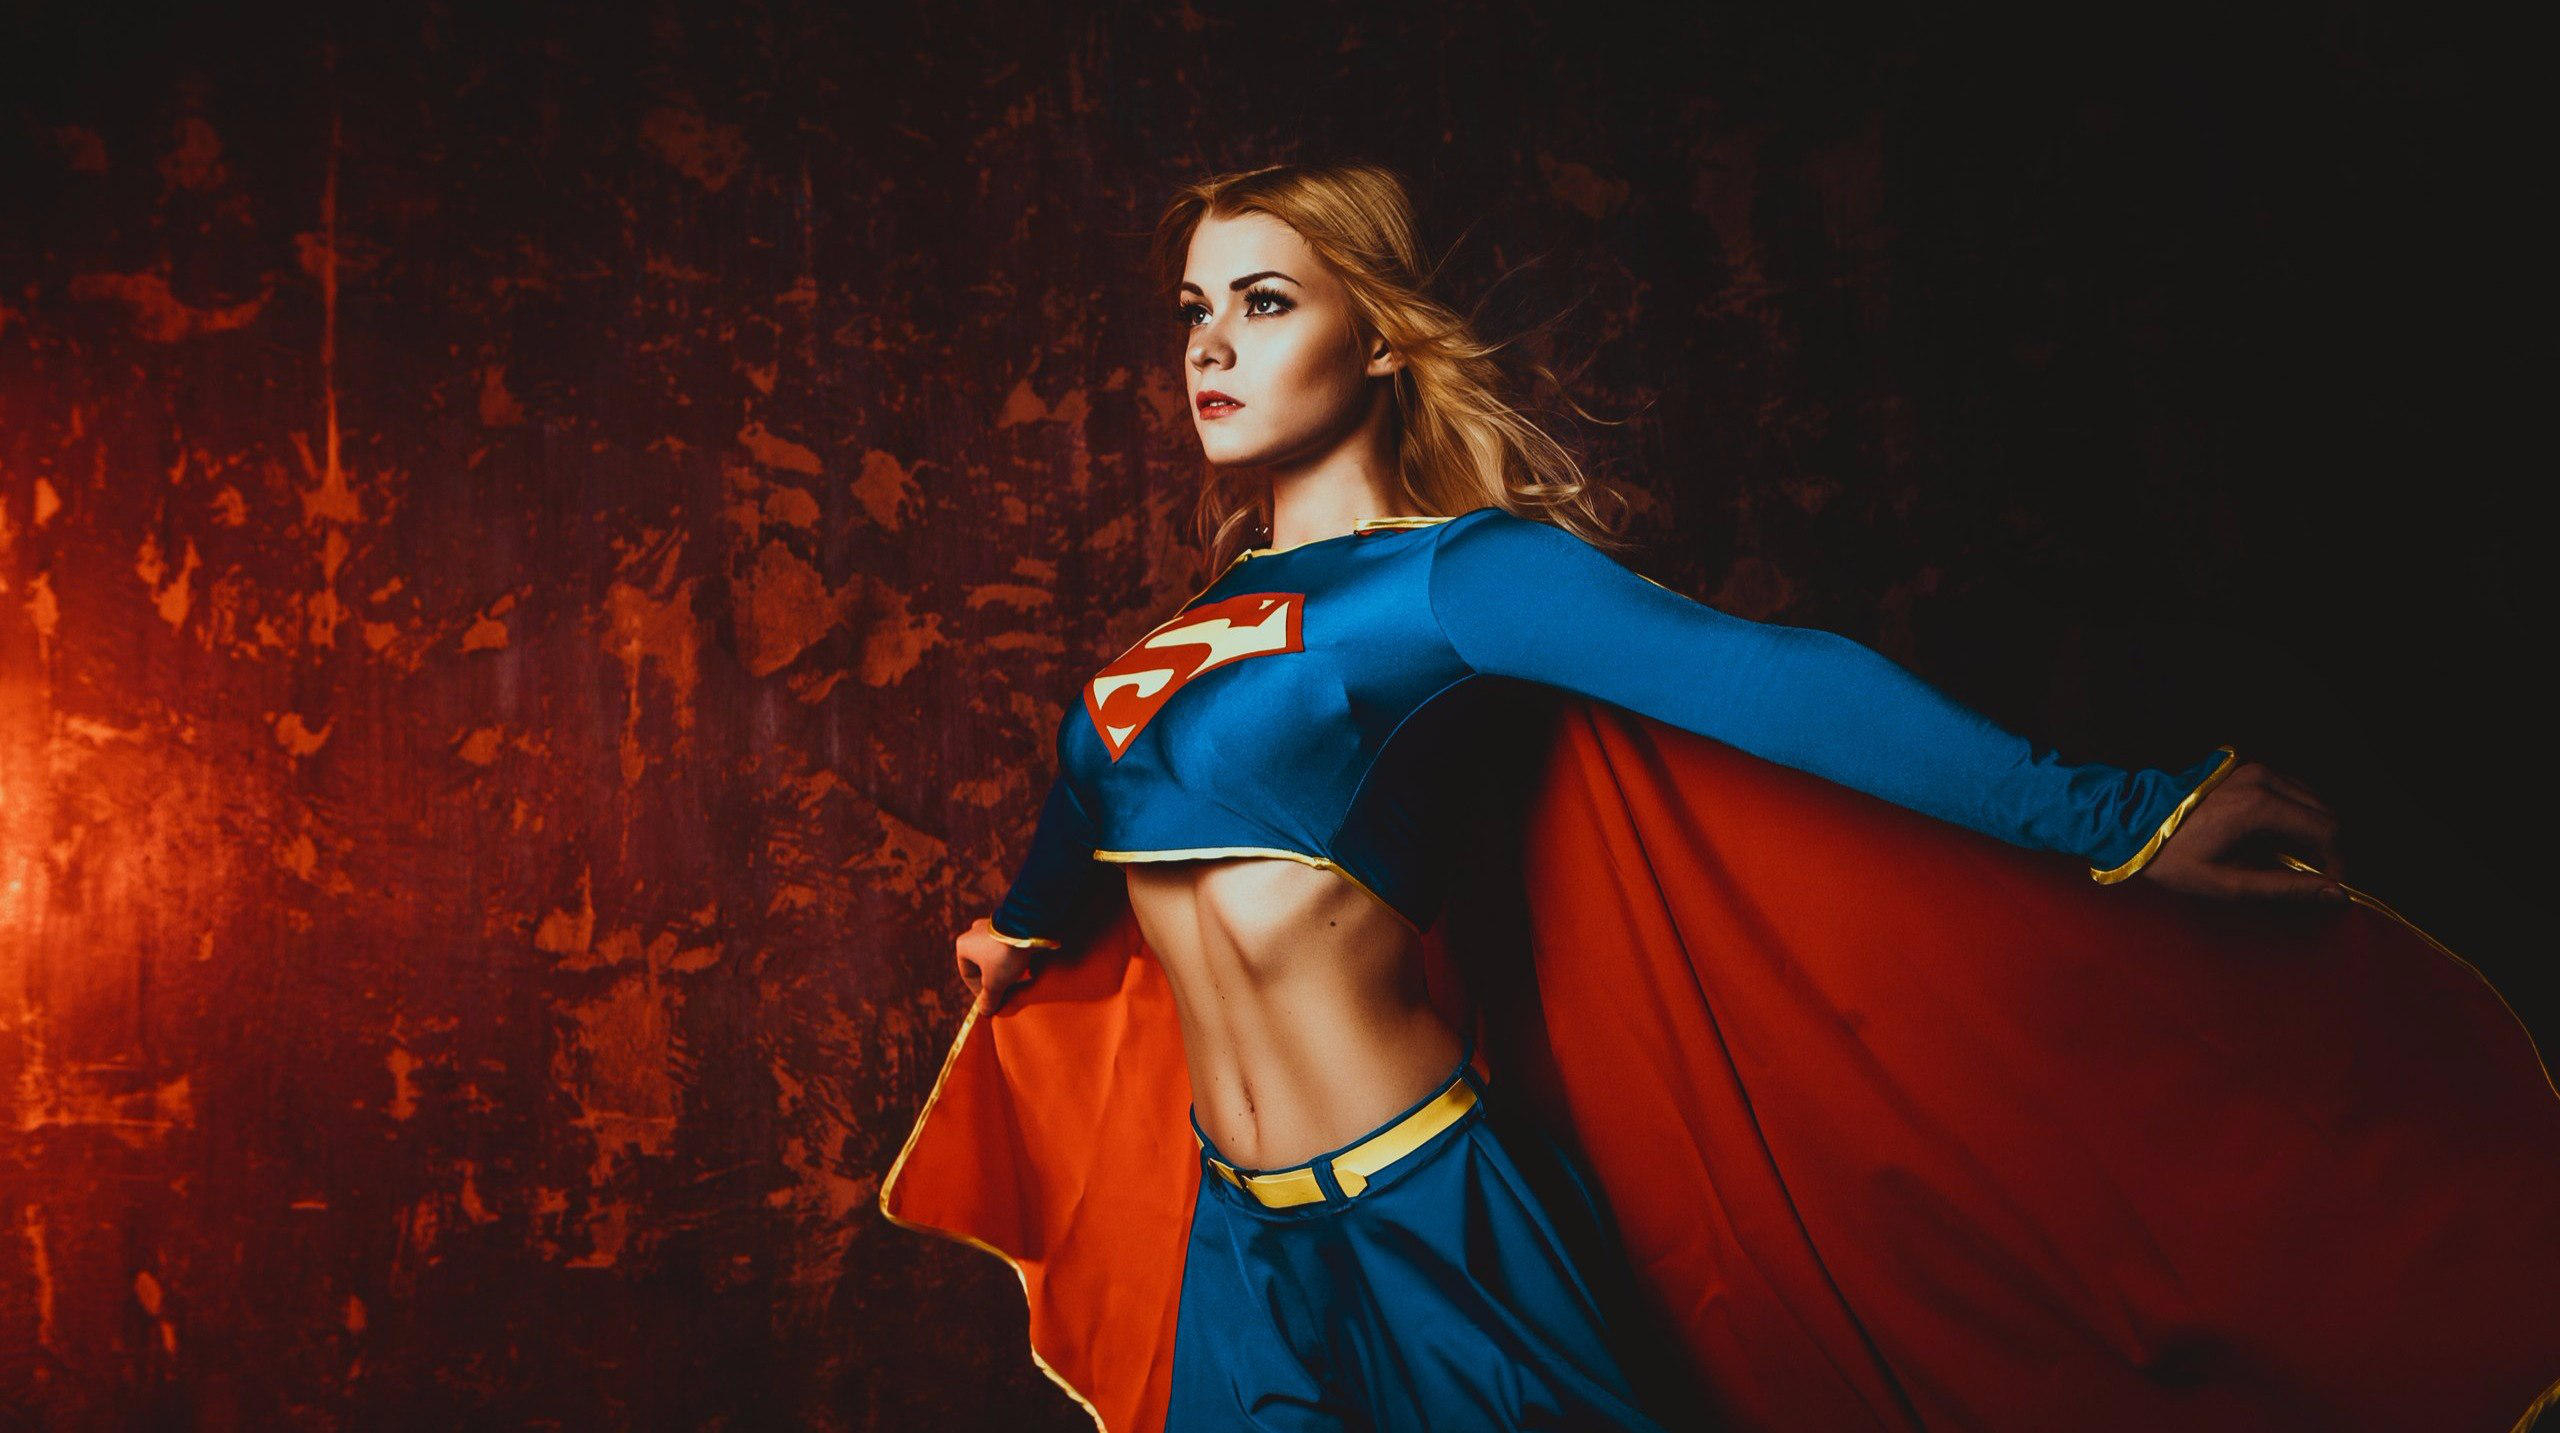 Supergirl Cosplay 2018 Hd Superheroes 4k Wallpapers Images Backgrounds Photos And Pictures